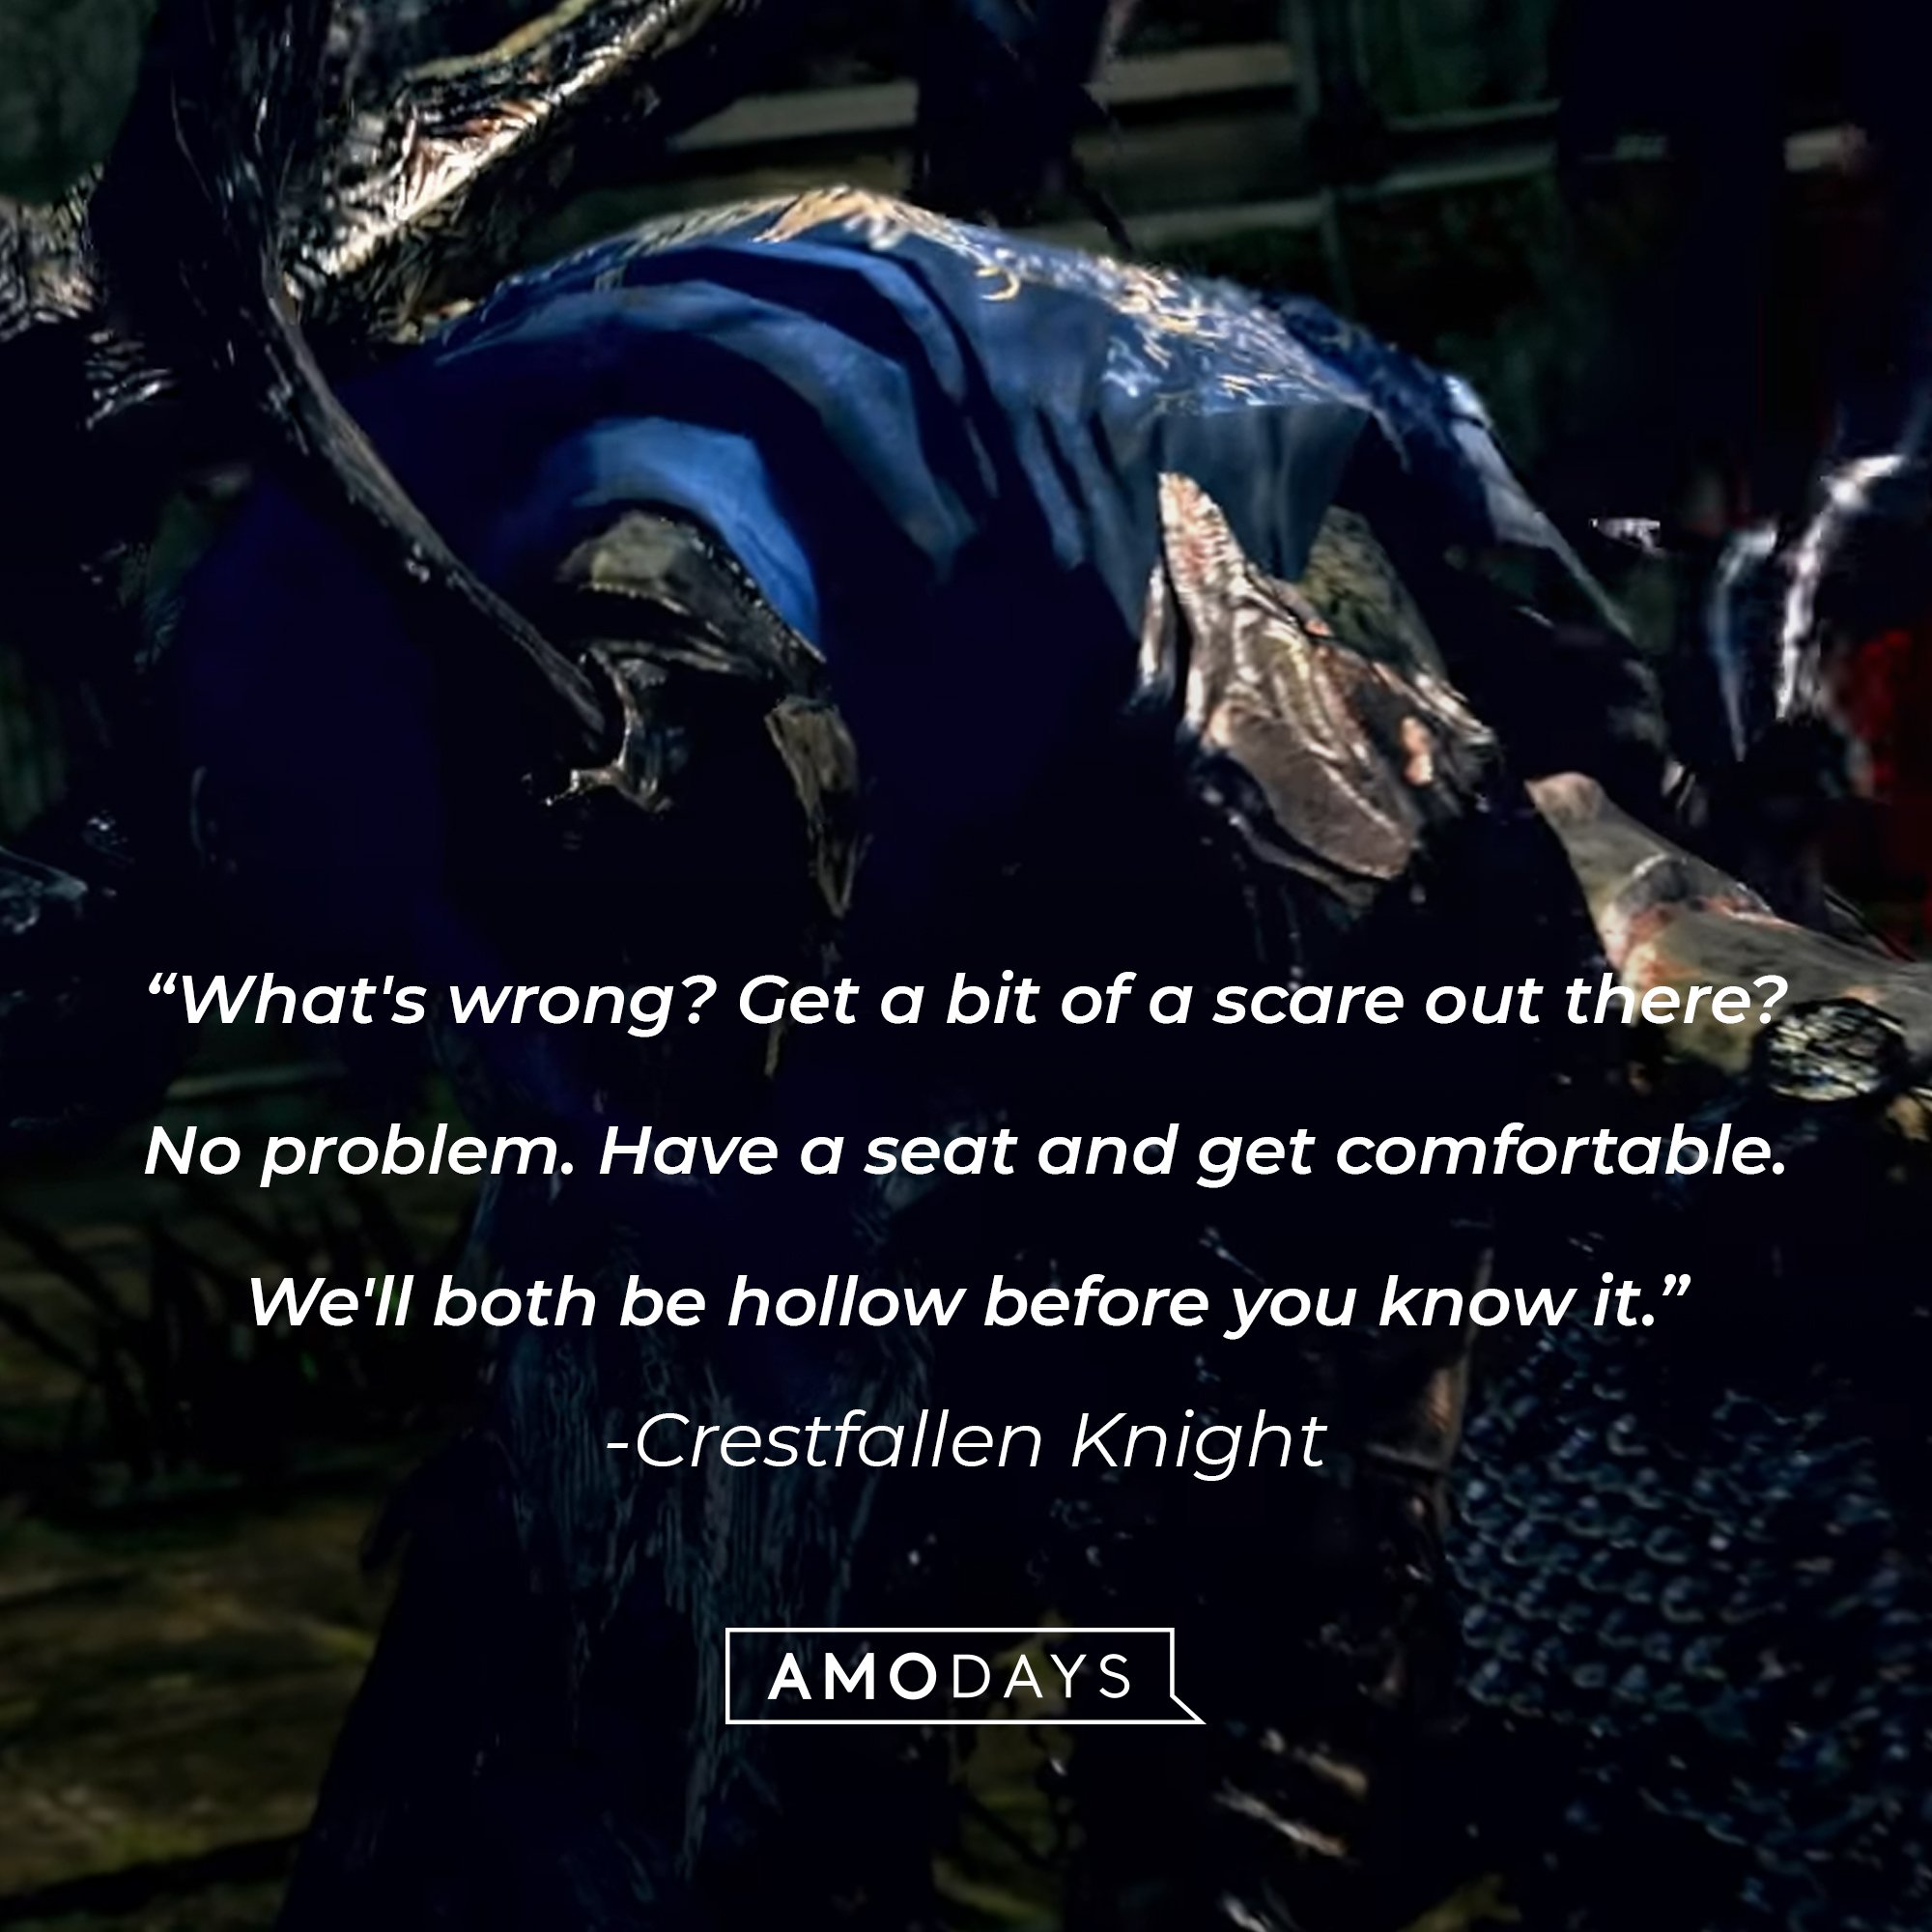 Crestfallen Knight’s quote: "What's wrong? Get a bit of a scare out there? No problem. Have a seat and get comfortable. We'll both be hollow before you know it." | Image: AmoDays